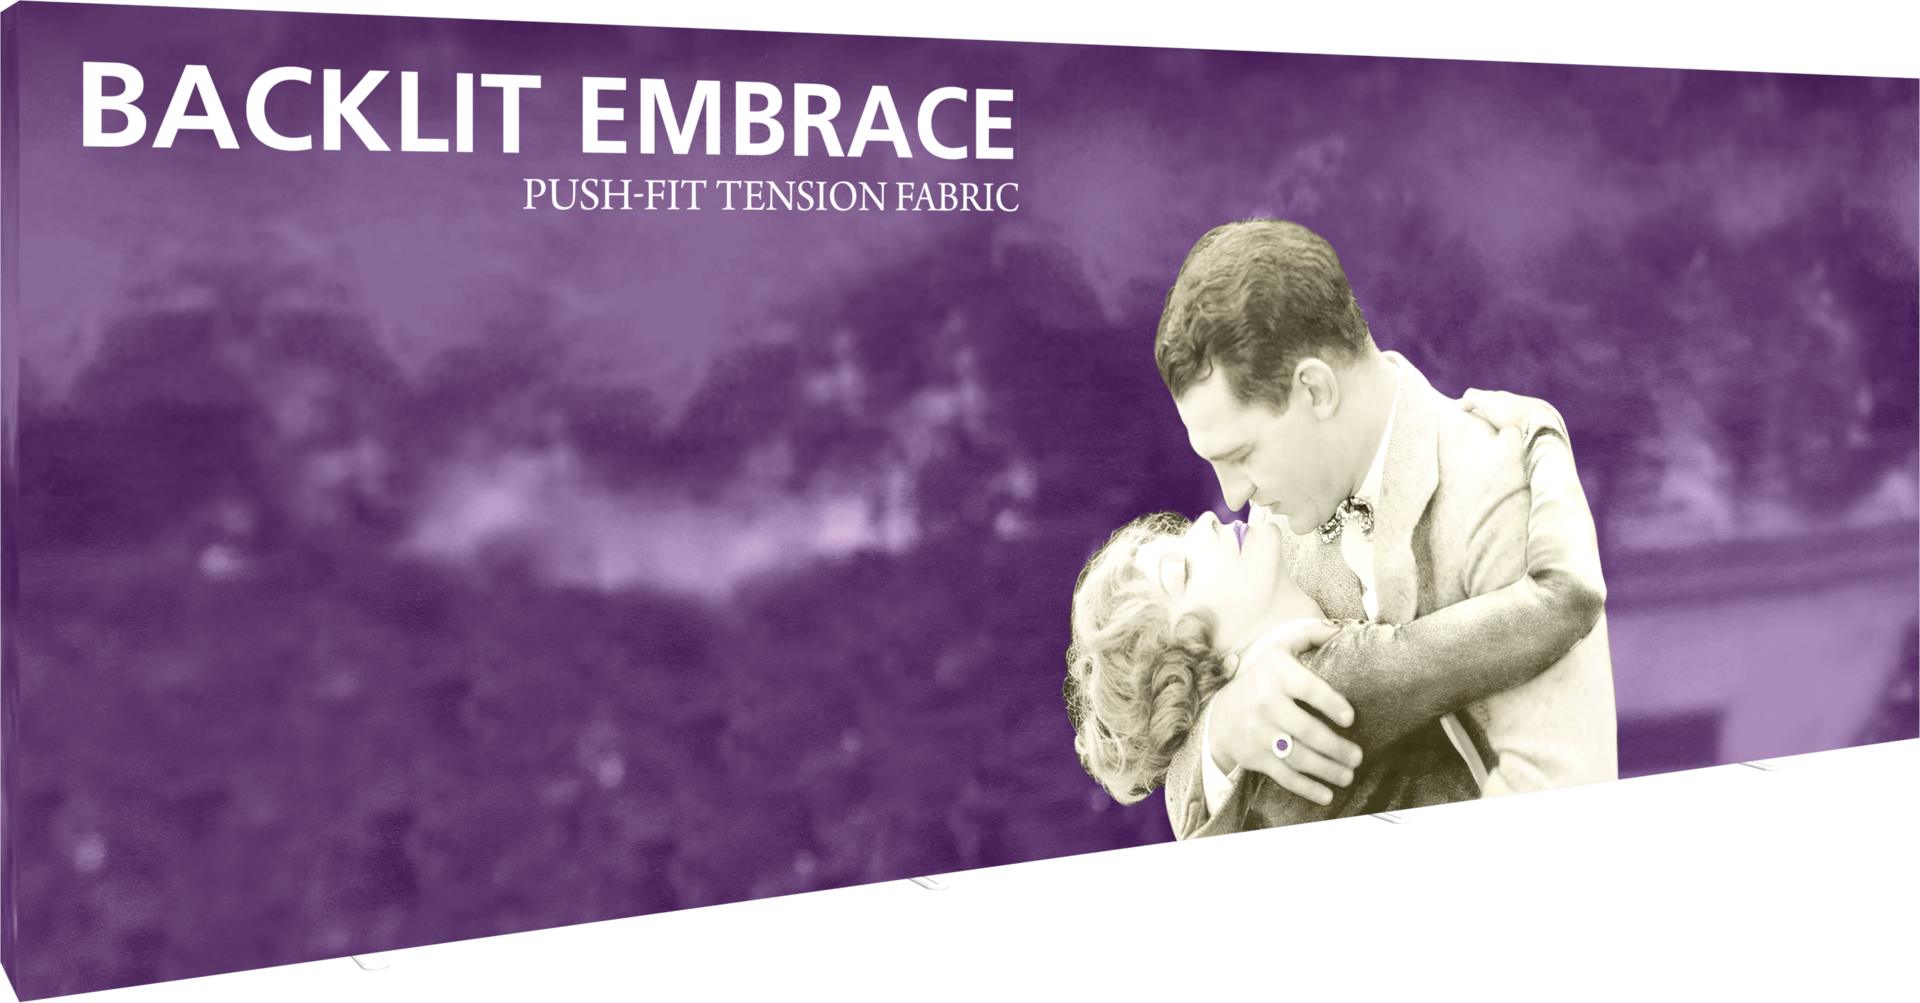 Embrace 4x3 Push-Fit Tension Fabric Displays